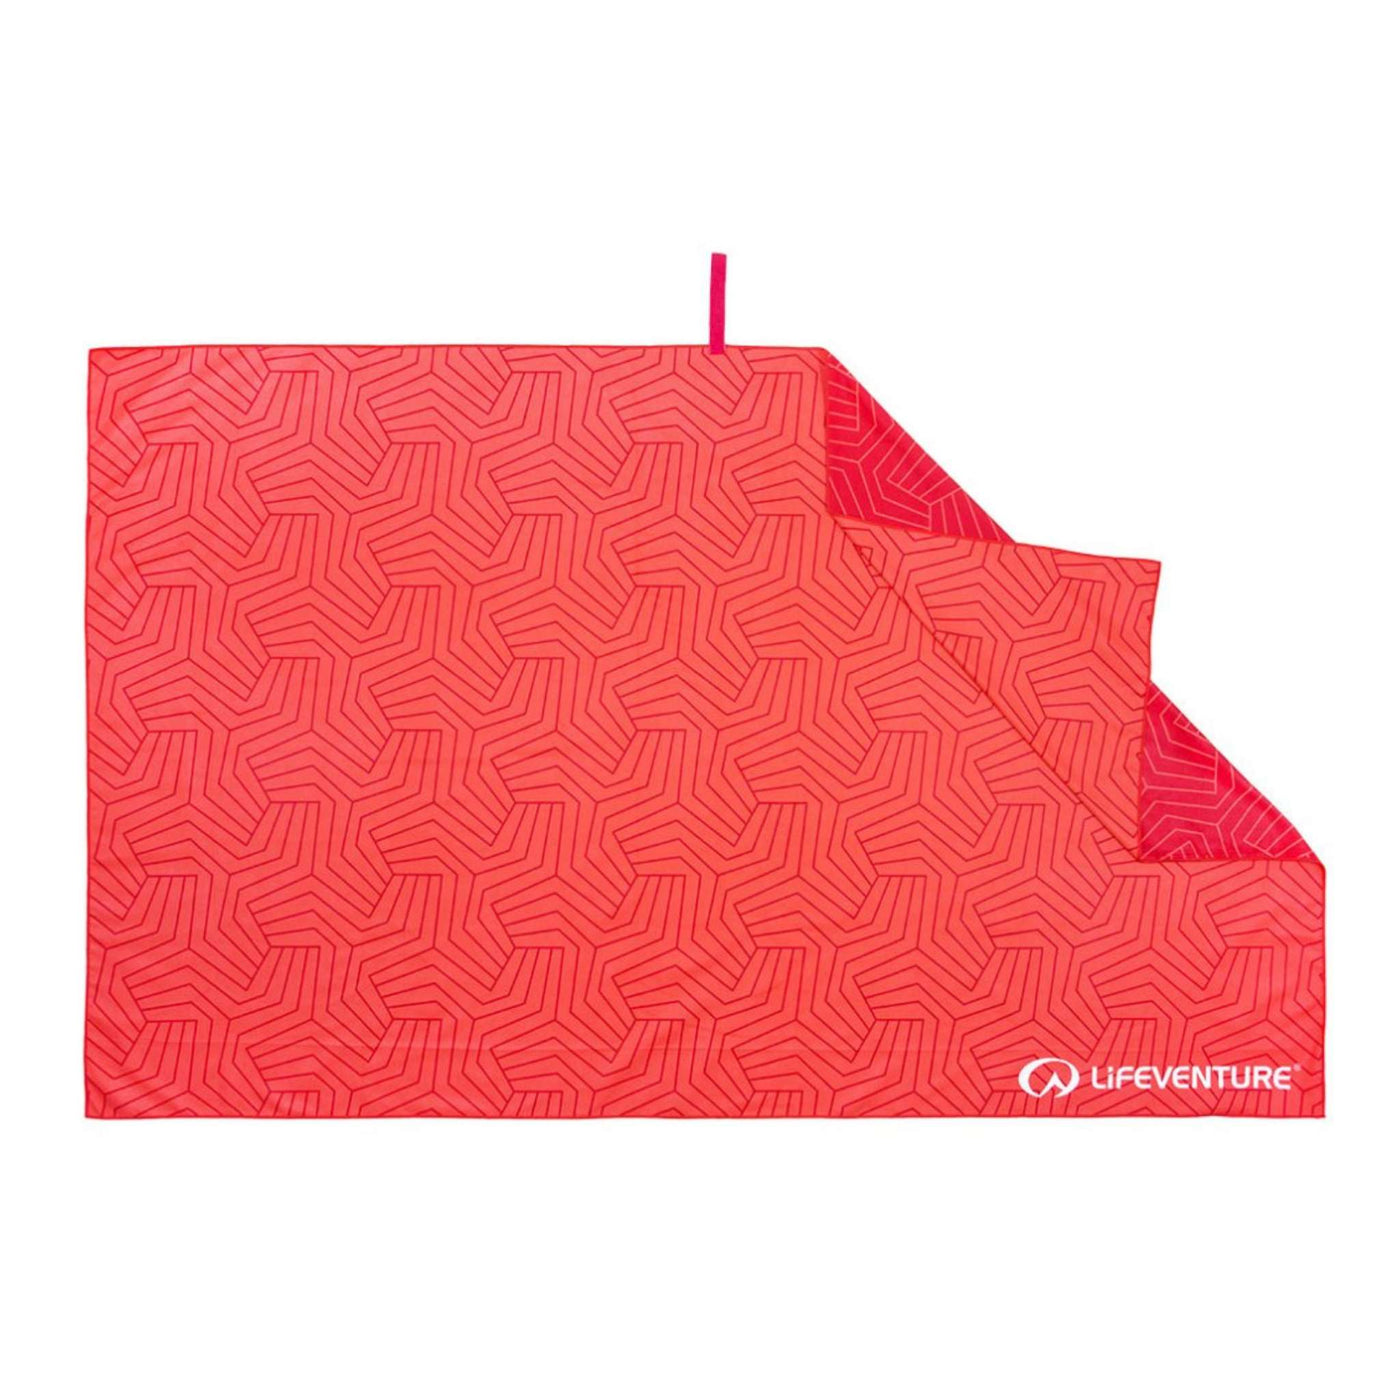 Lifeventure Recycled SoftFibre Printed Towels | Quickdry Travel Towel | Further Faster Christchurch NZ #geometric-coral